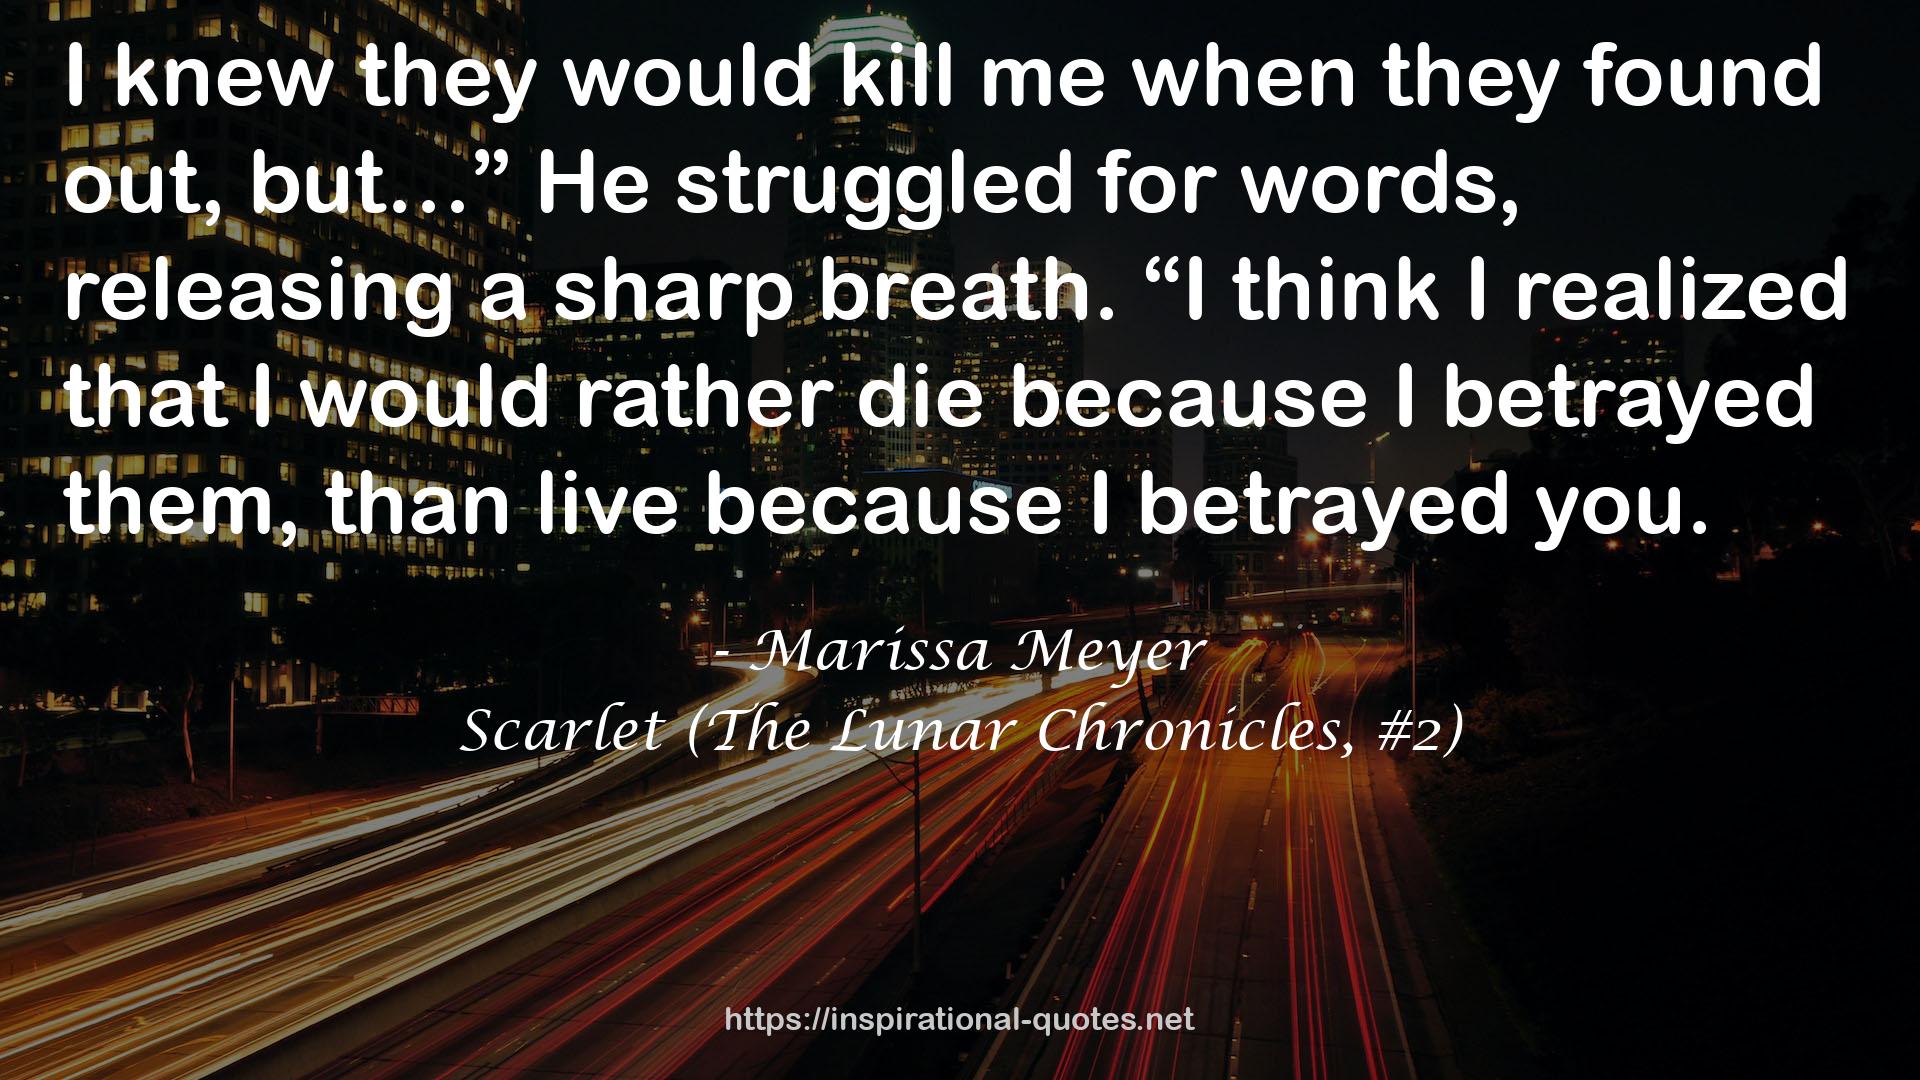 Scarlet (The Lunar Chronicles, #2) QUOTES